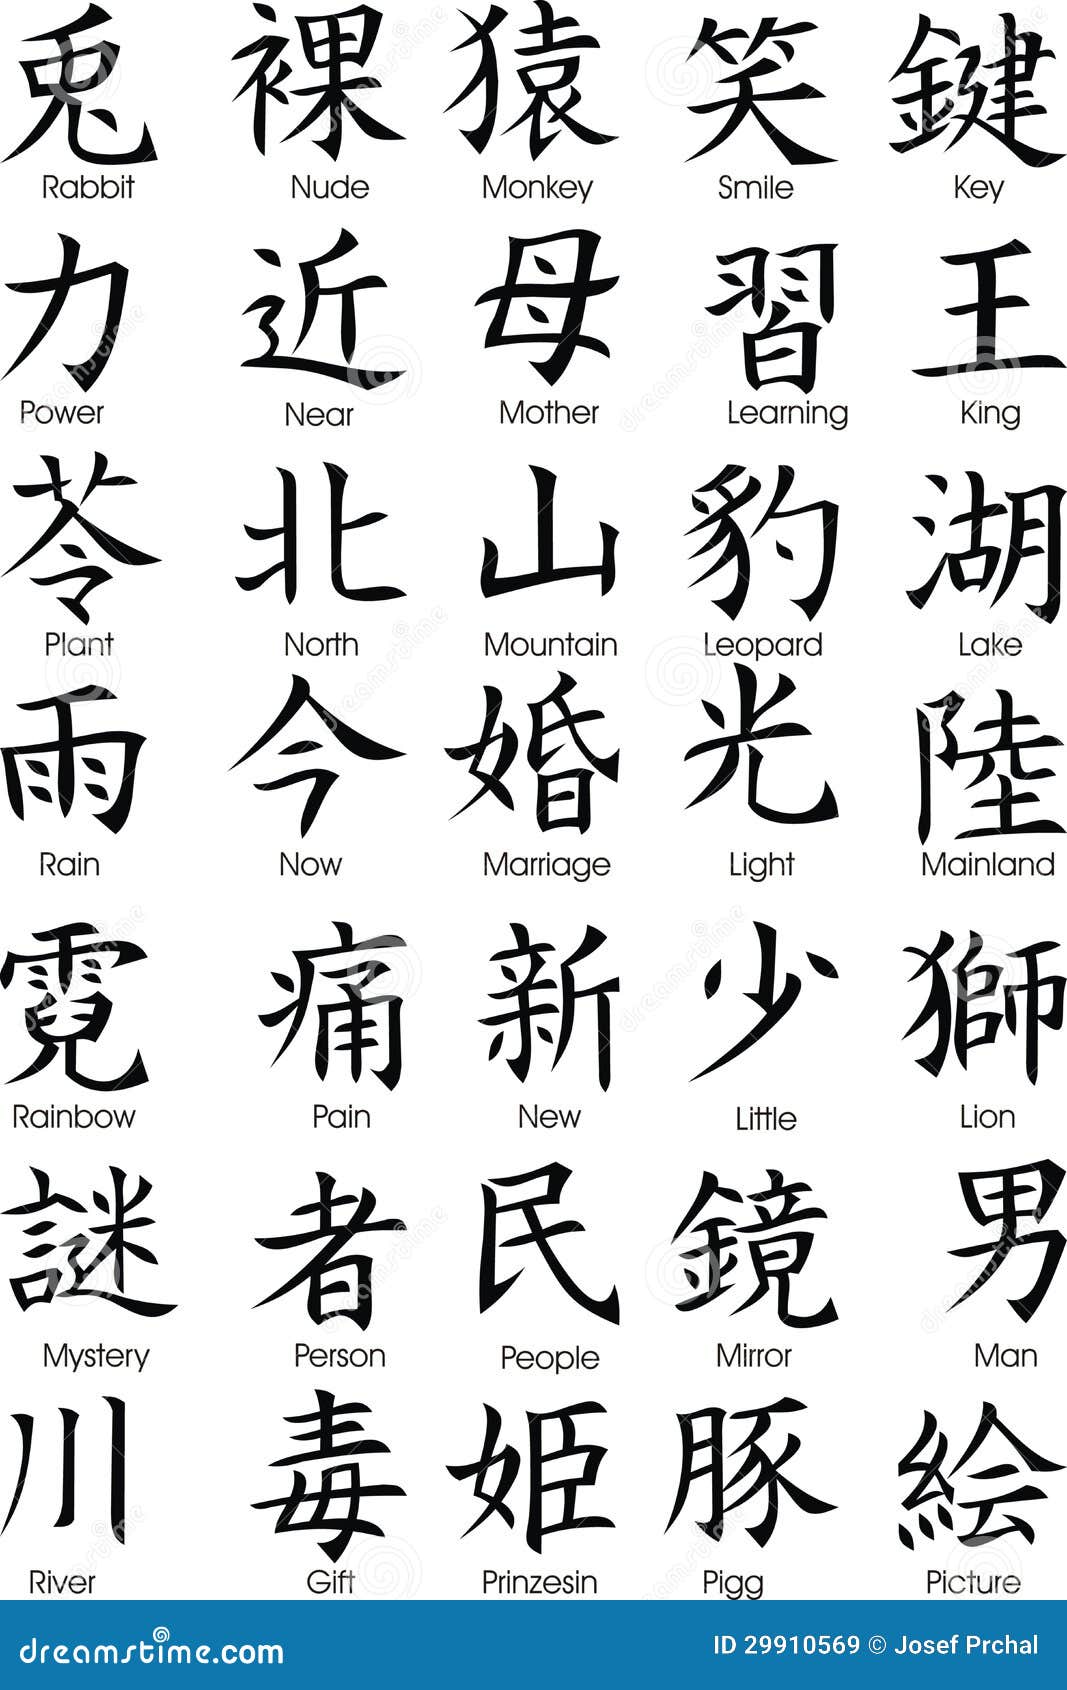 Different chinese words stock vector. Illustration of learning - 29910569